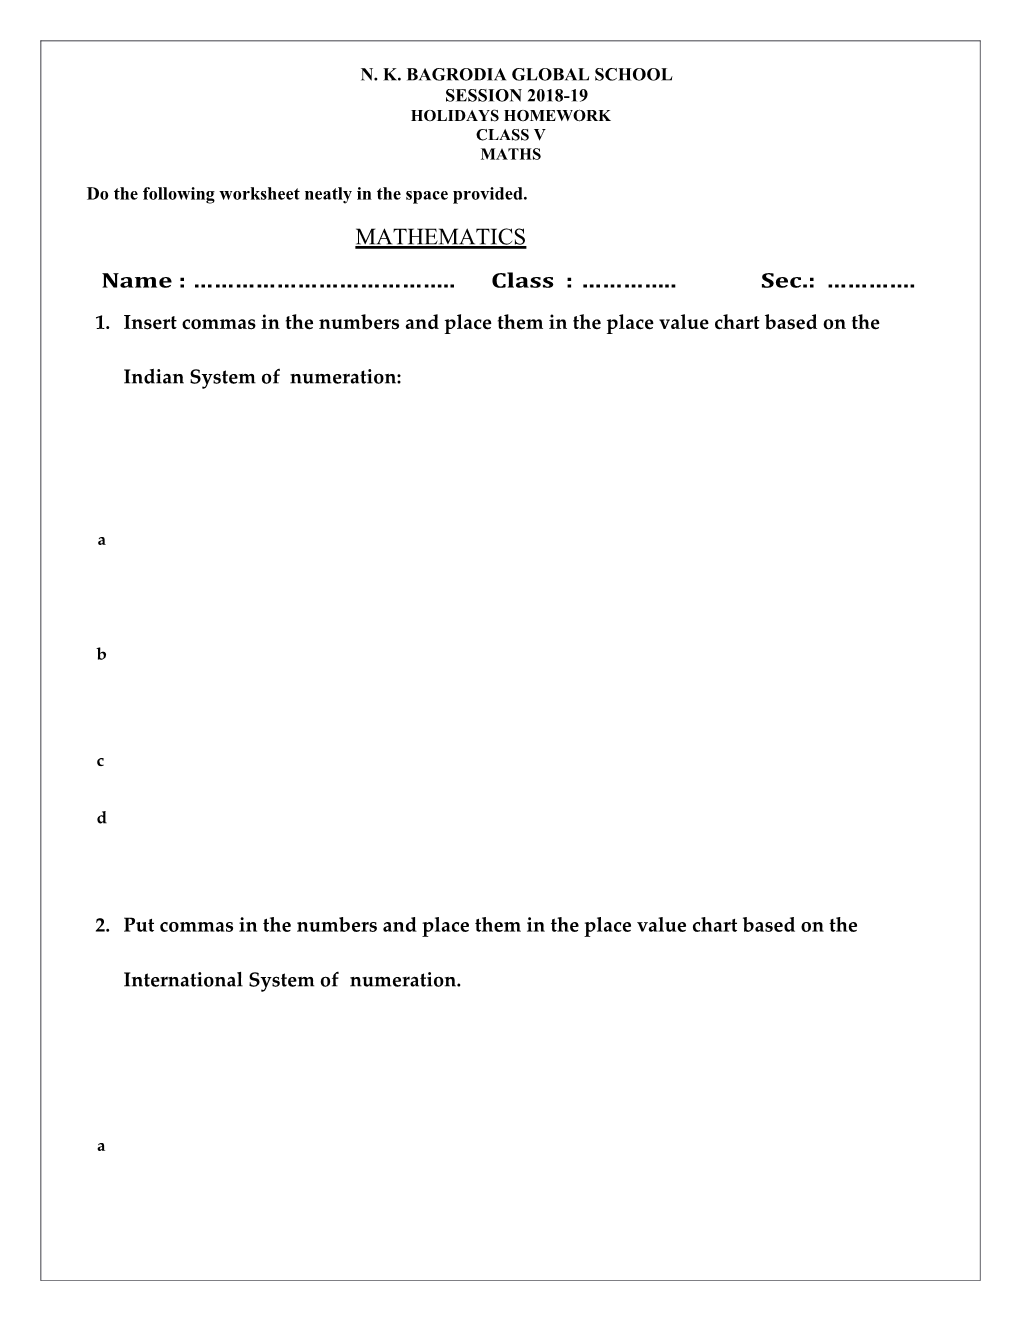 Do the Following Worksheet Neatly in the Space Provided